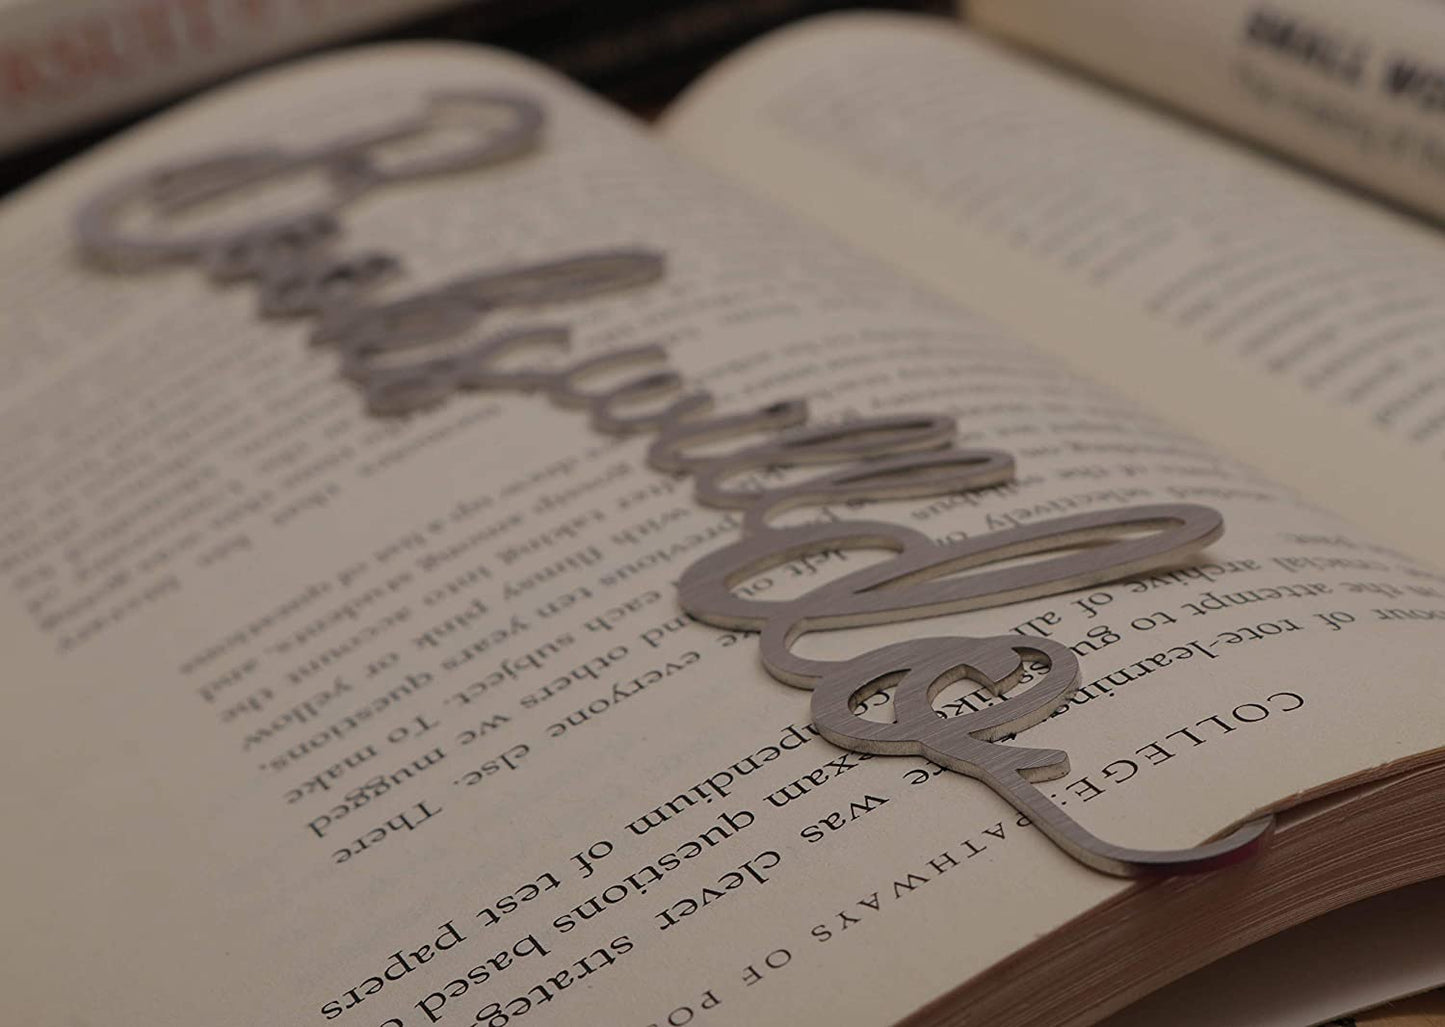 "Books will do" Stainless Steel Metal Bookmark